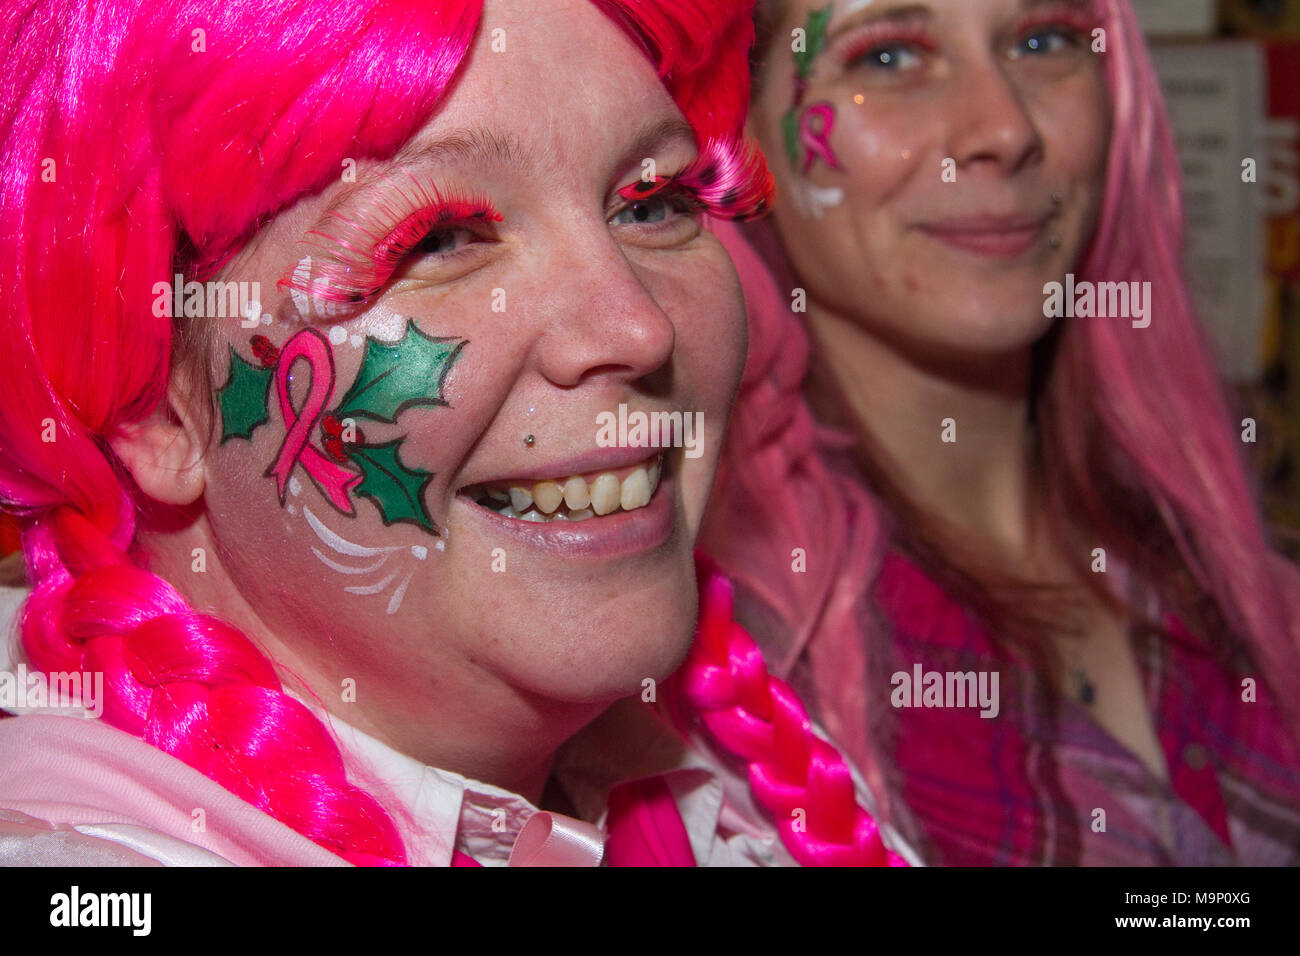 Woman in pink wig with holly painted on her face at a Christmas Fair Stock Photo